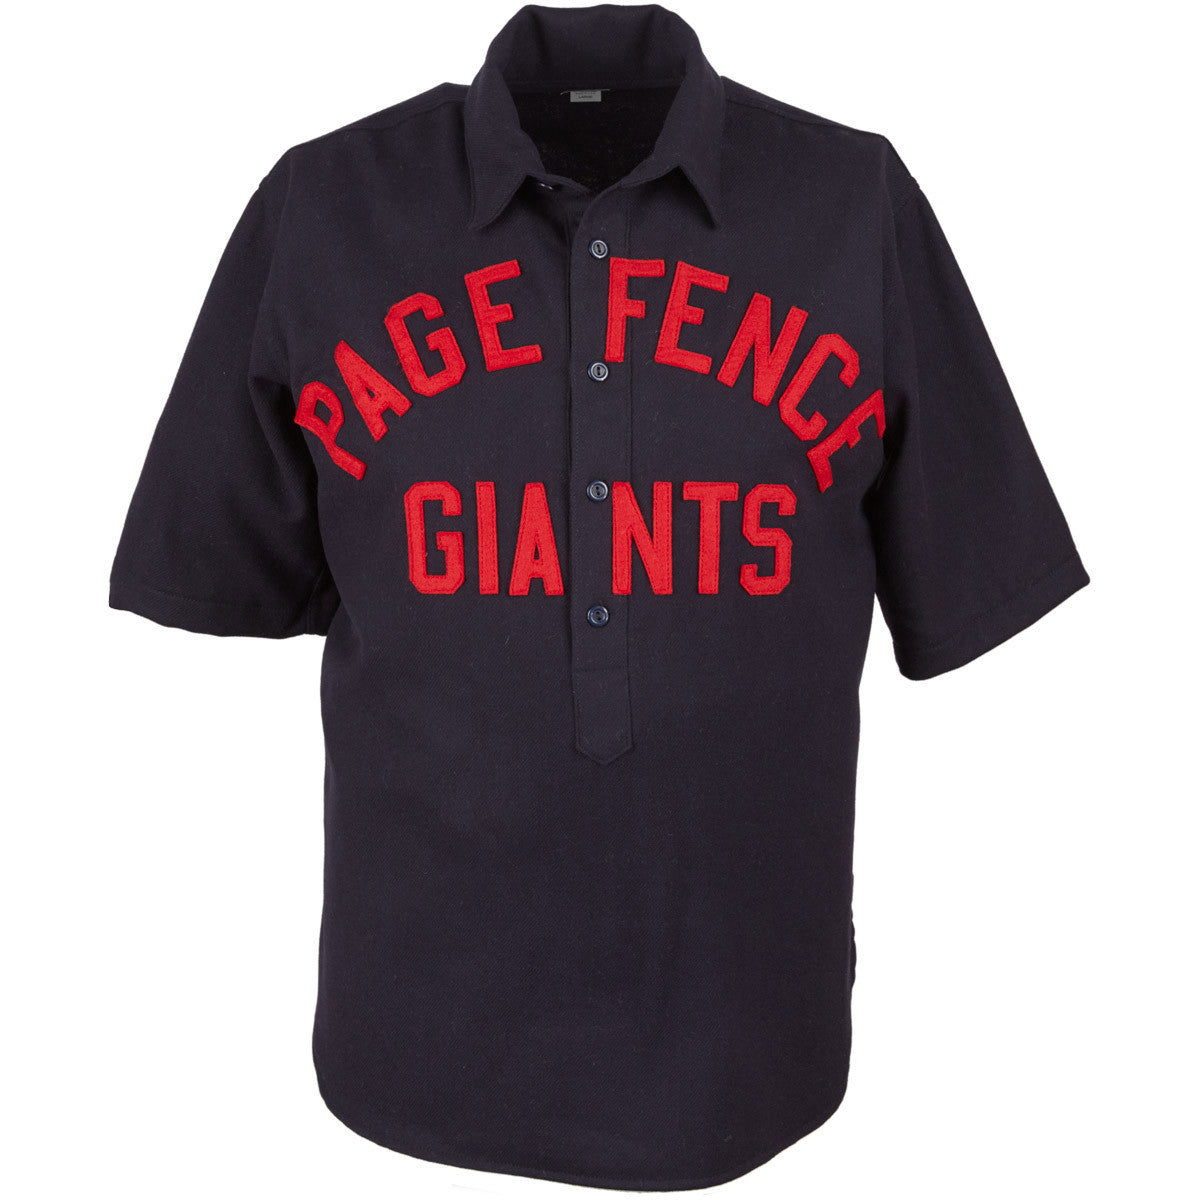 Page Fence Giants 1895 Home Jersey